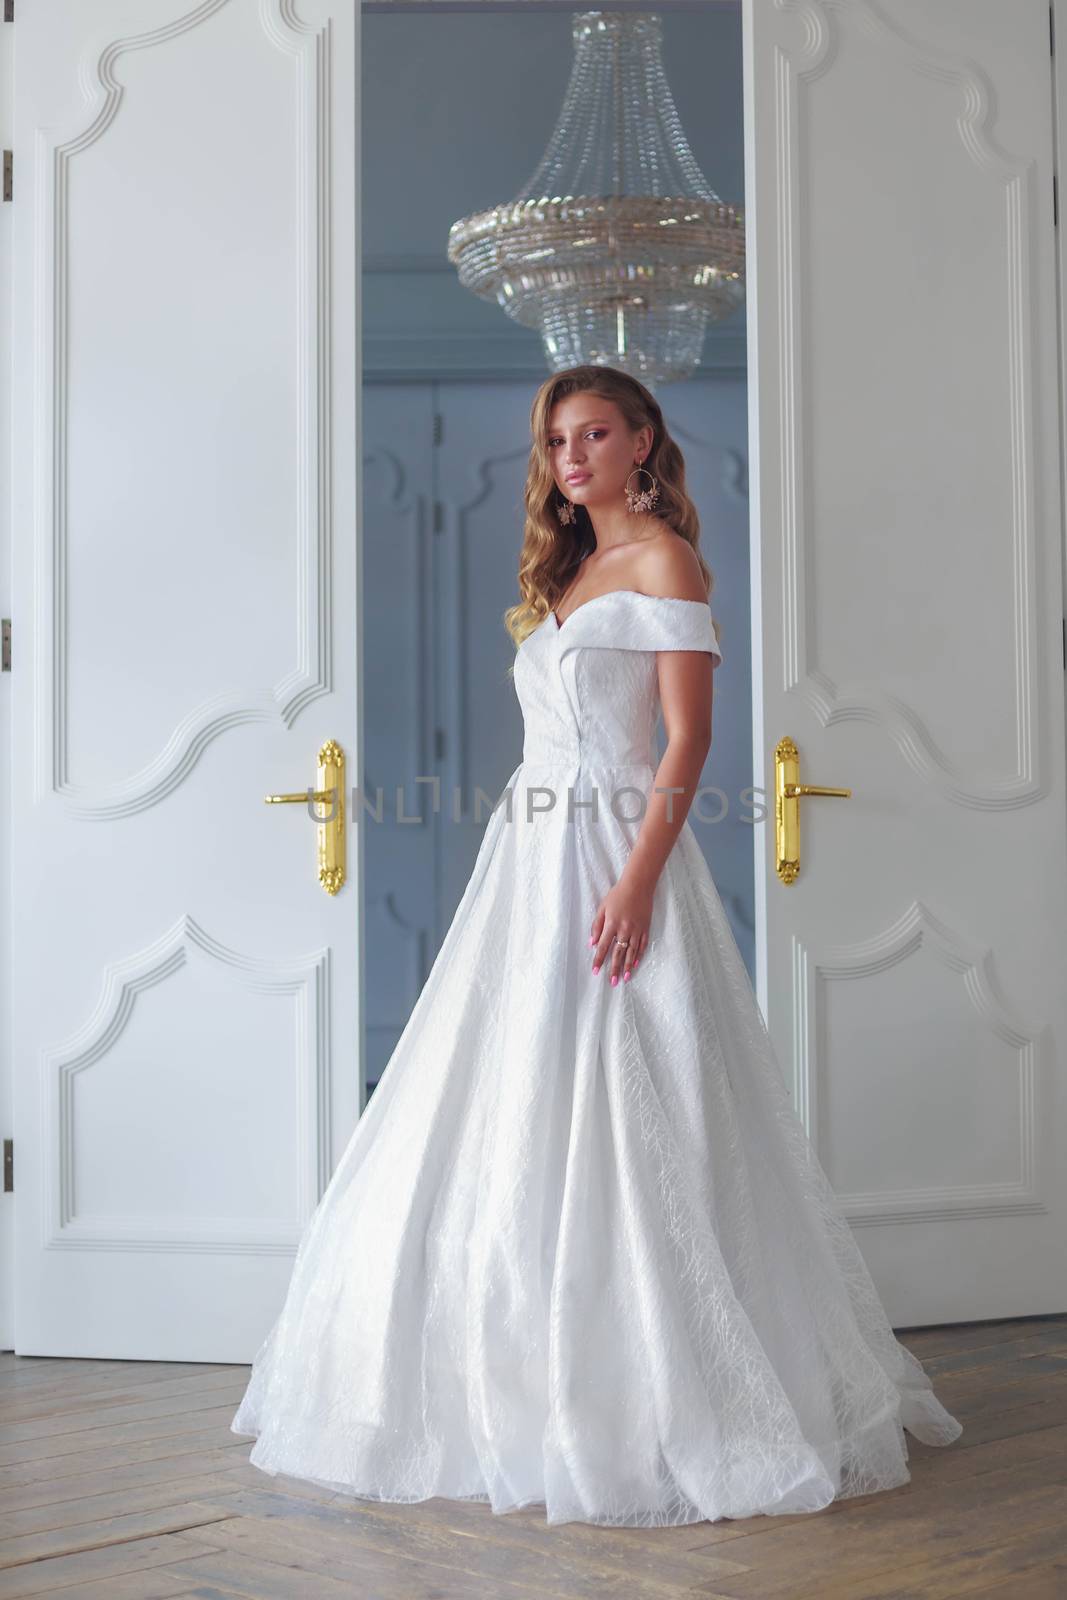 The bride stands at the door in a beautiful white room on the day of her wedding ceremony